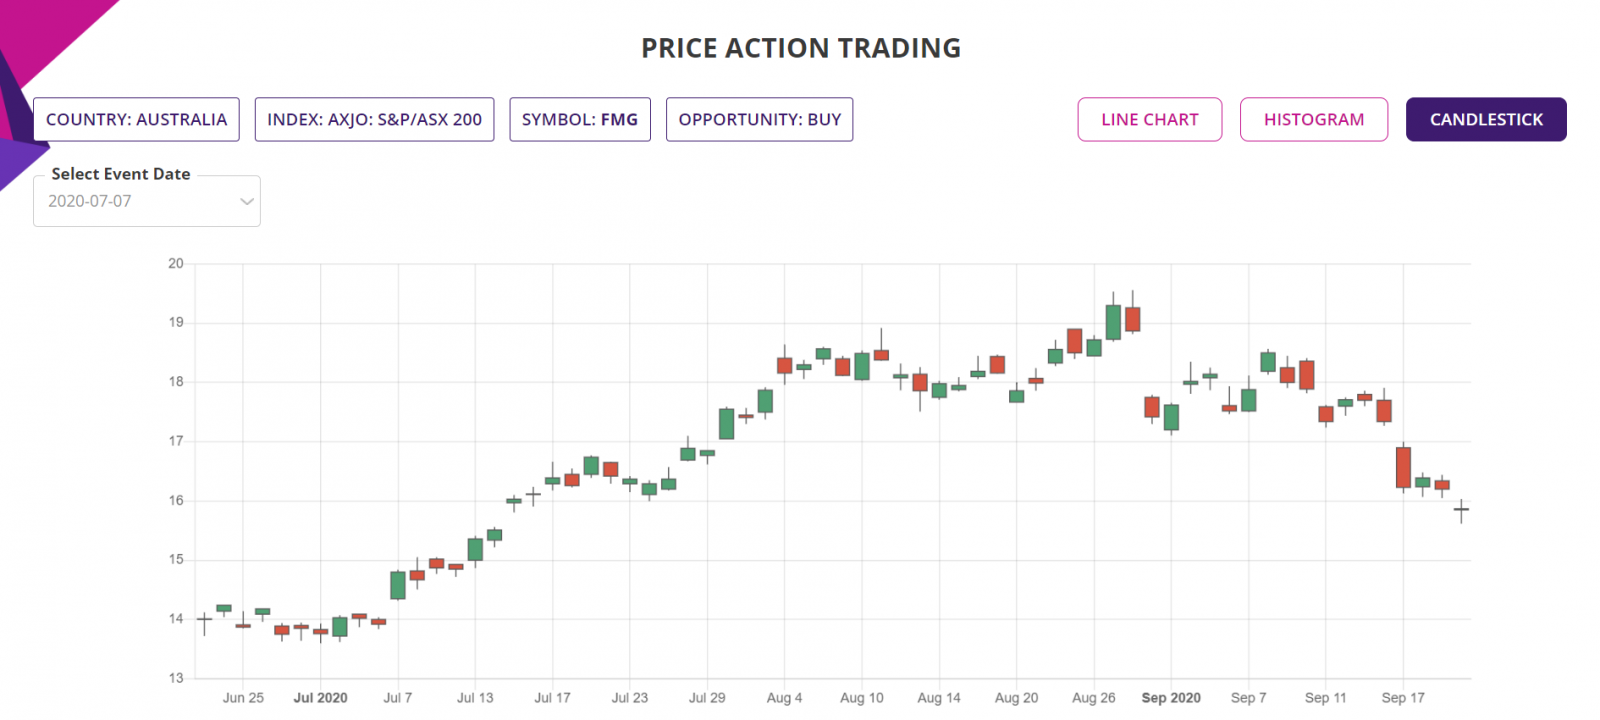 Price action trading strategy, detailed report, Candlestick chart, ASX200 Stocks